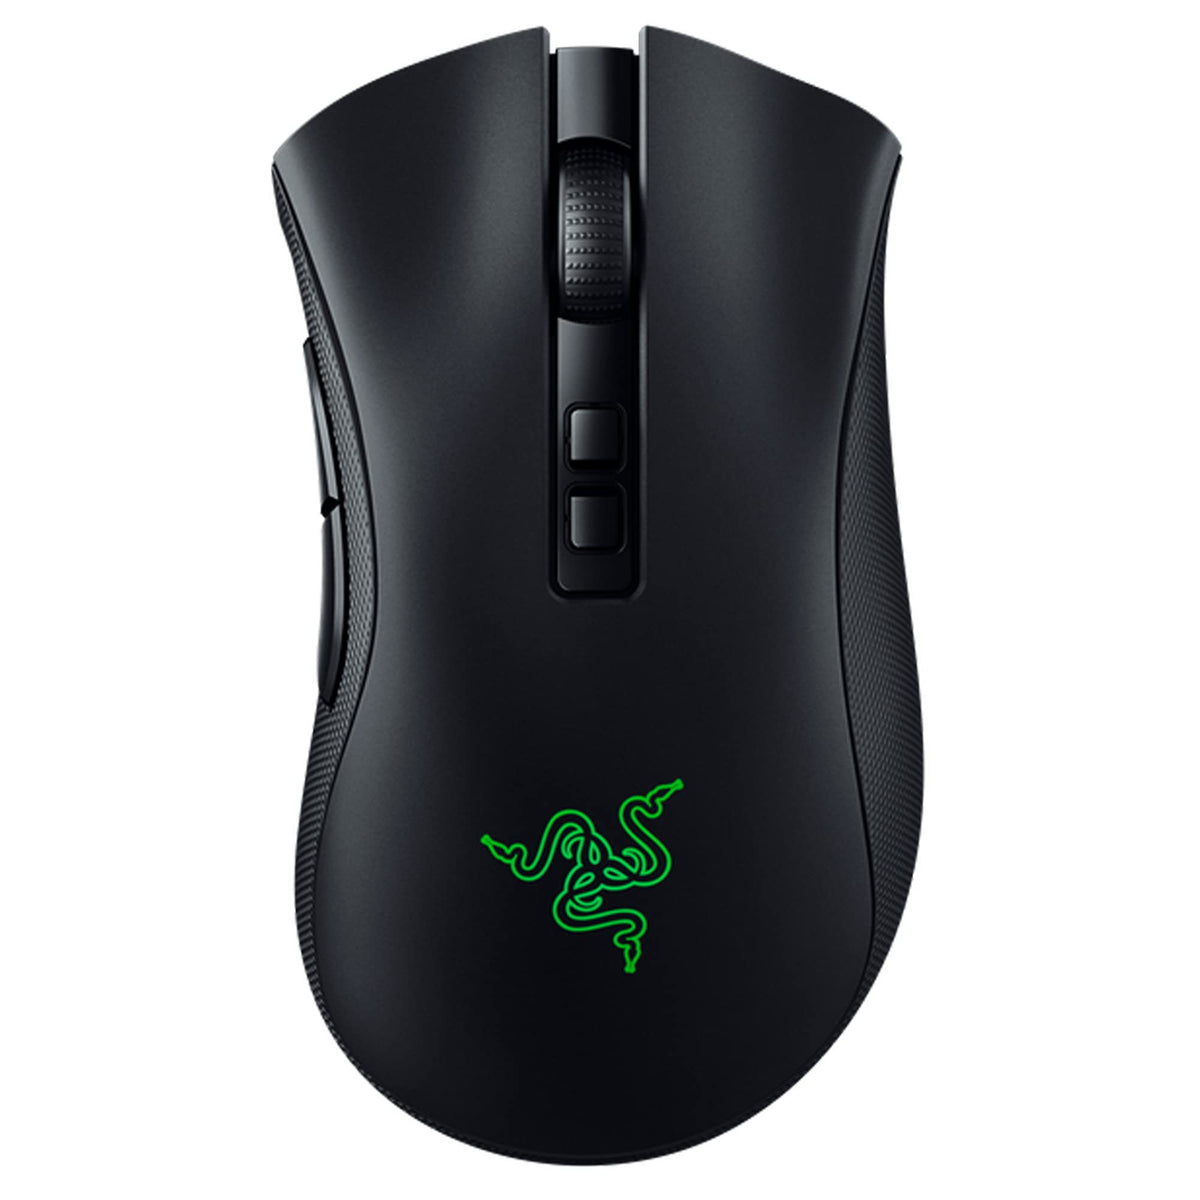 Razer DeathAdder v2 Pro Wireless Gaming Mouse: 20K DPI Optical Sensor, 3X Faster Optical Switch, Chroma RGB, 70Hr Battery, 8 Programmable Buttons - Classic Black